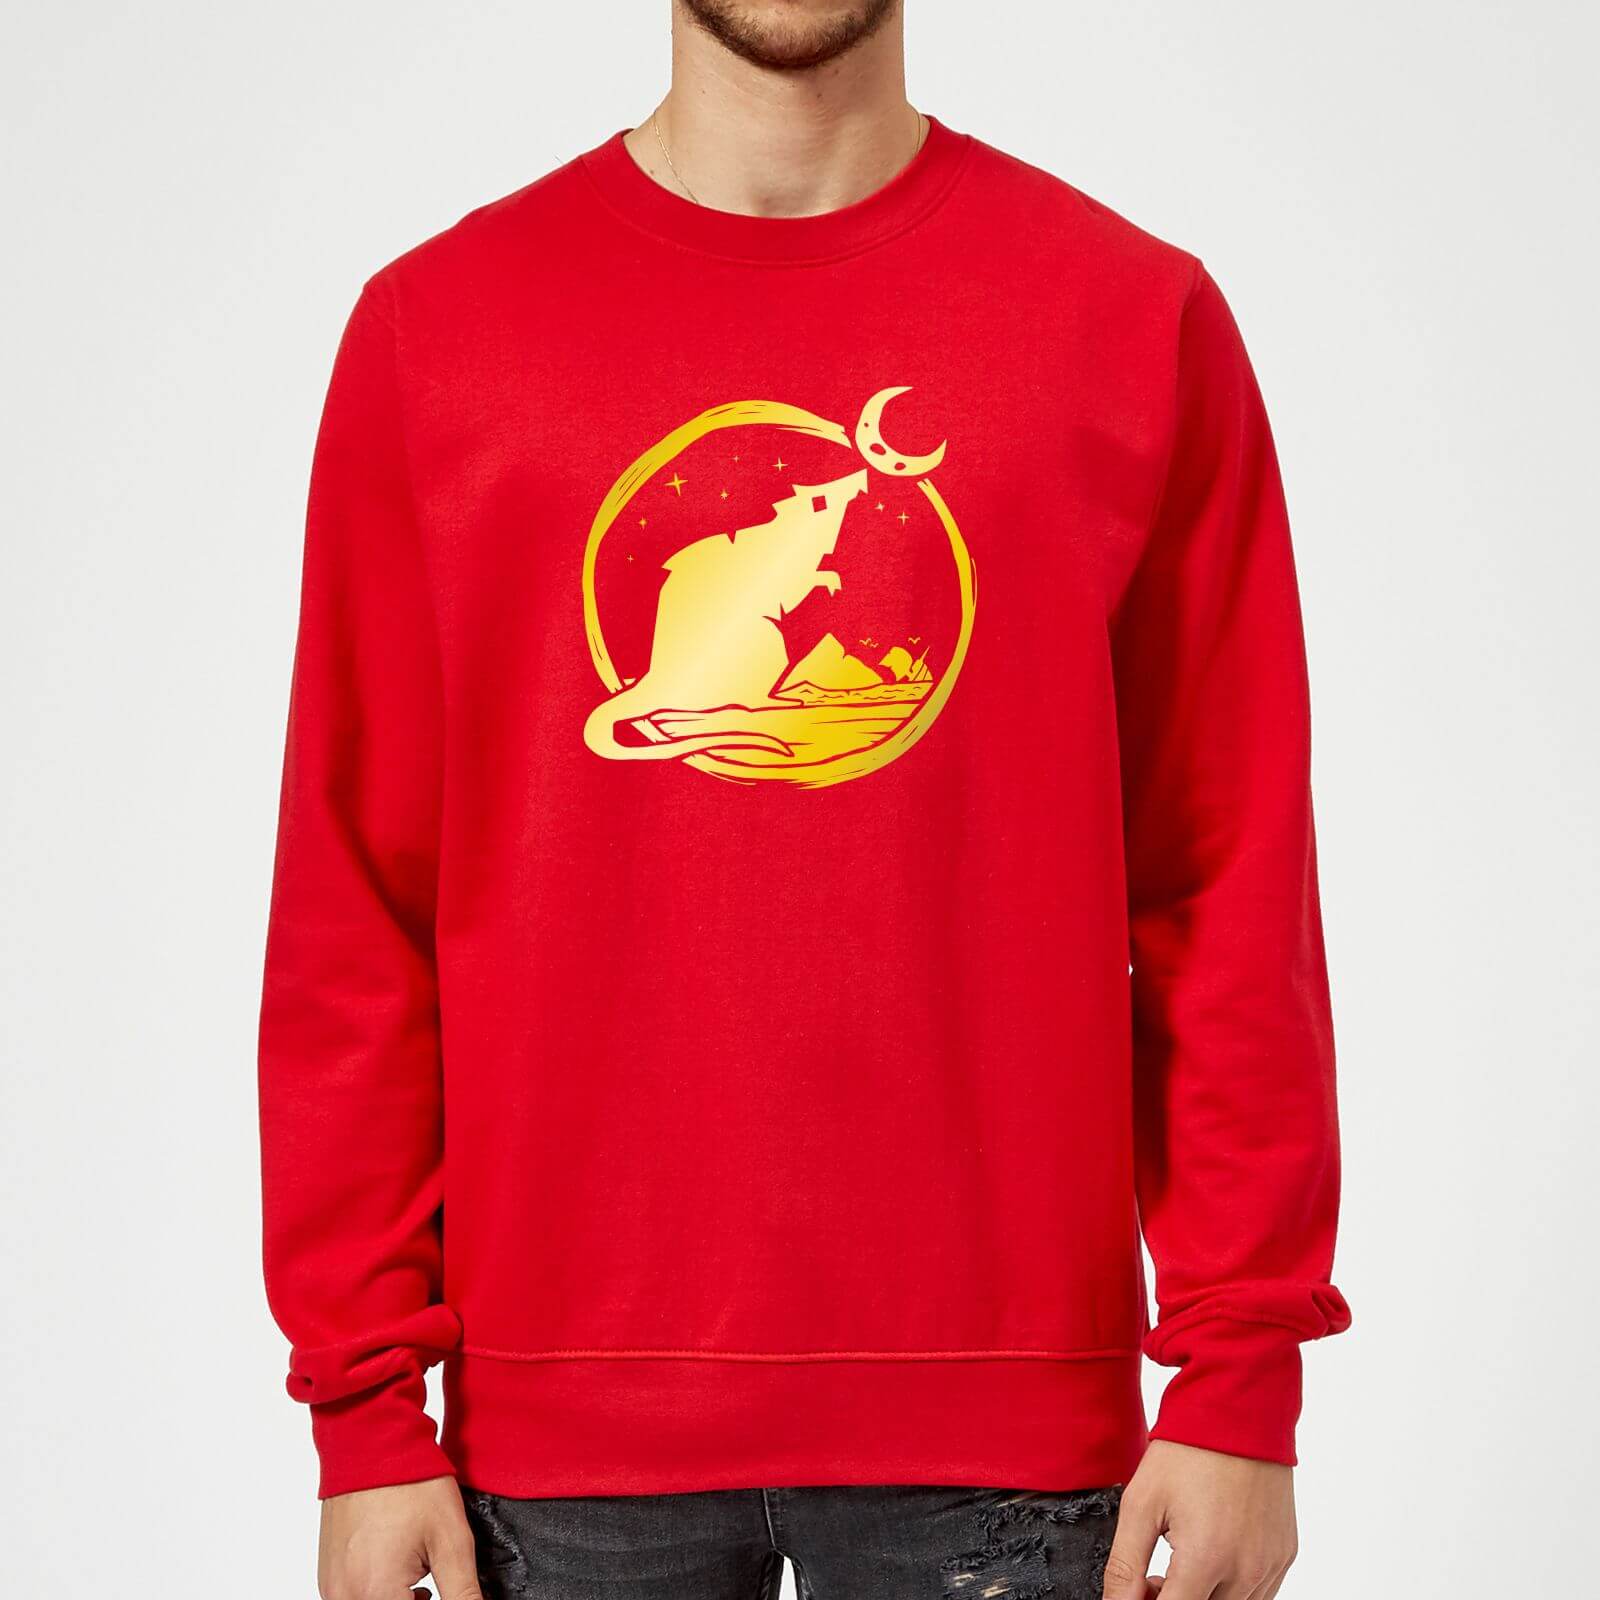 Sea of Thieves Year of the Rat Sweatshirt - Red - L - Rouge